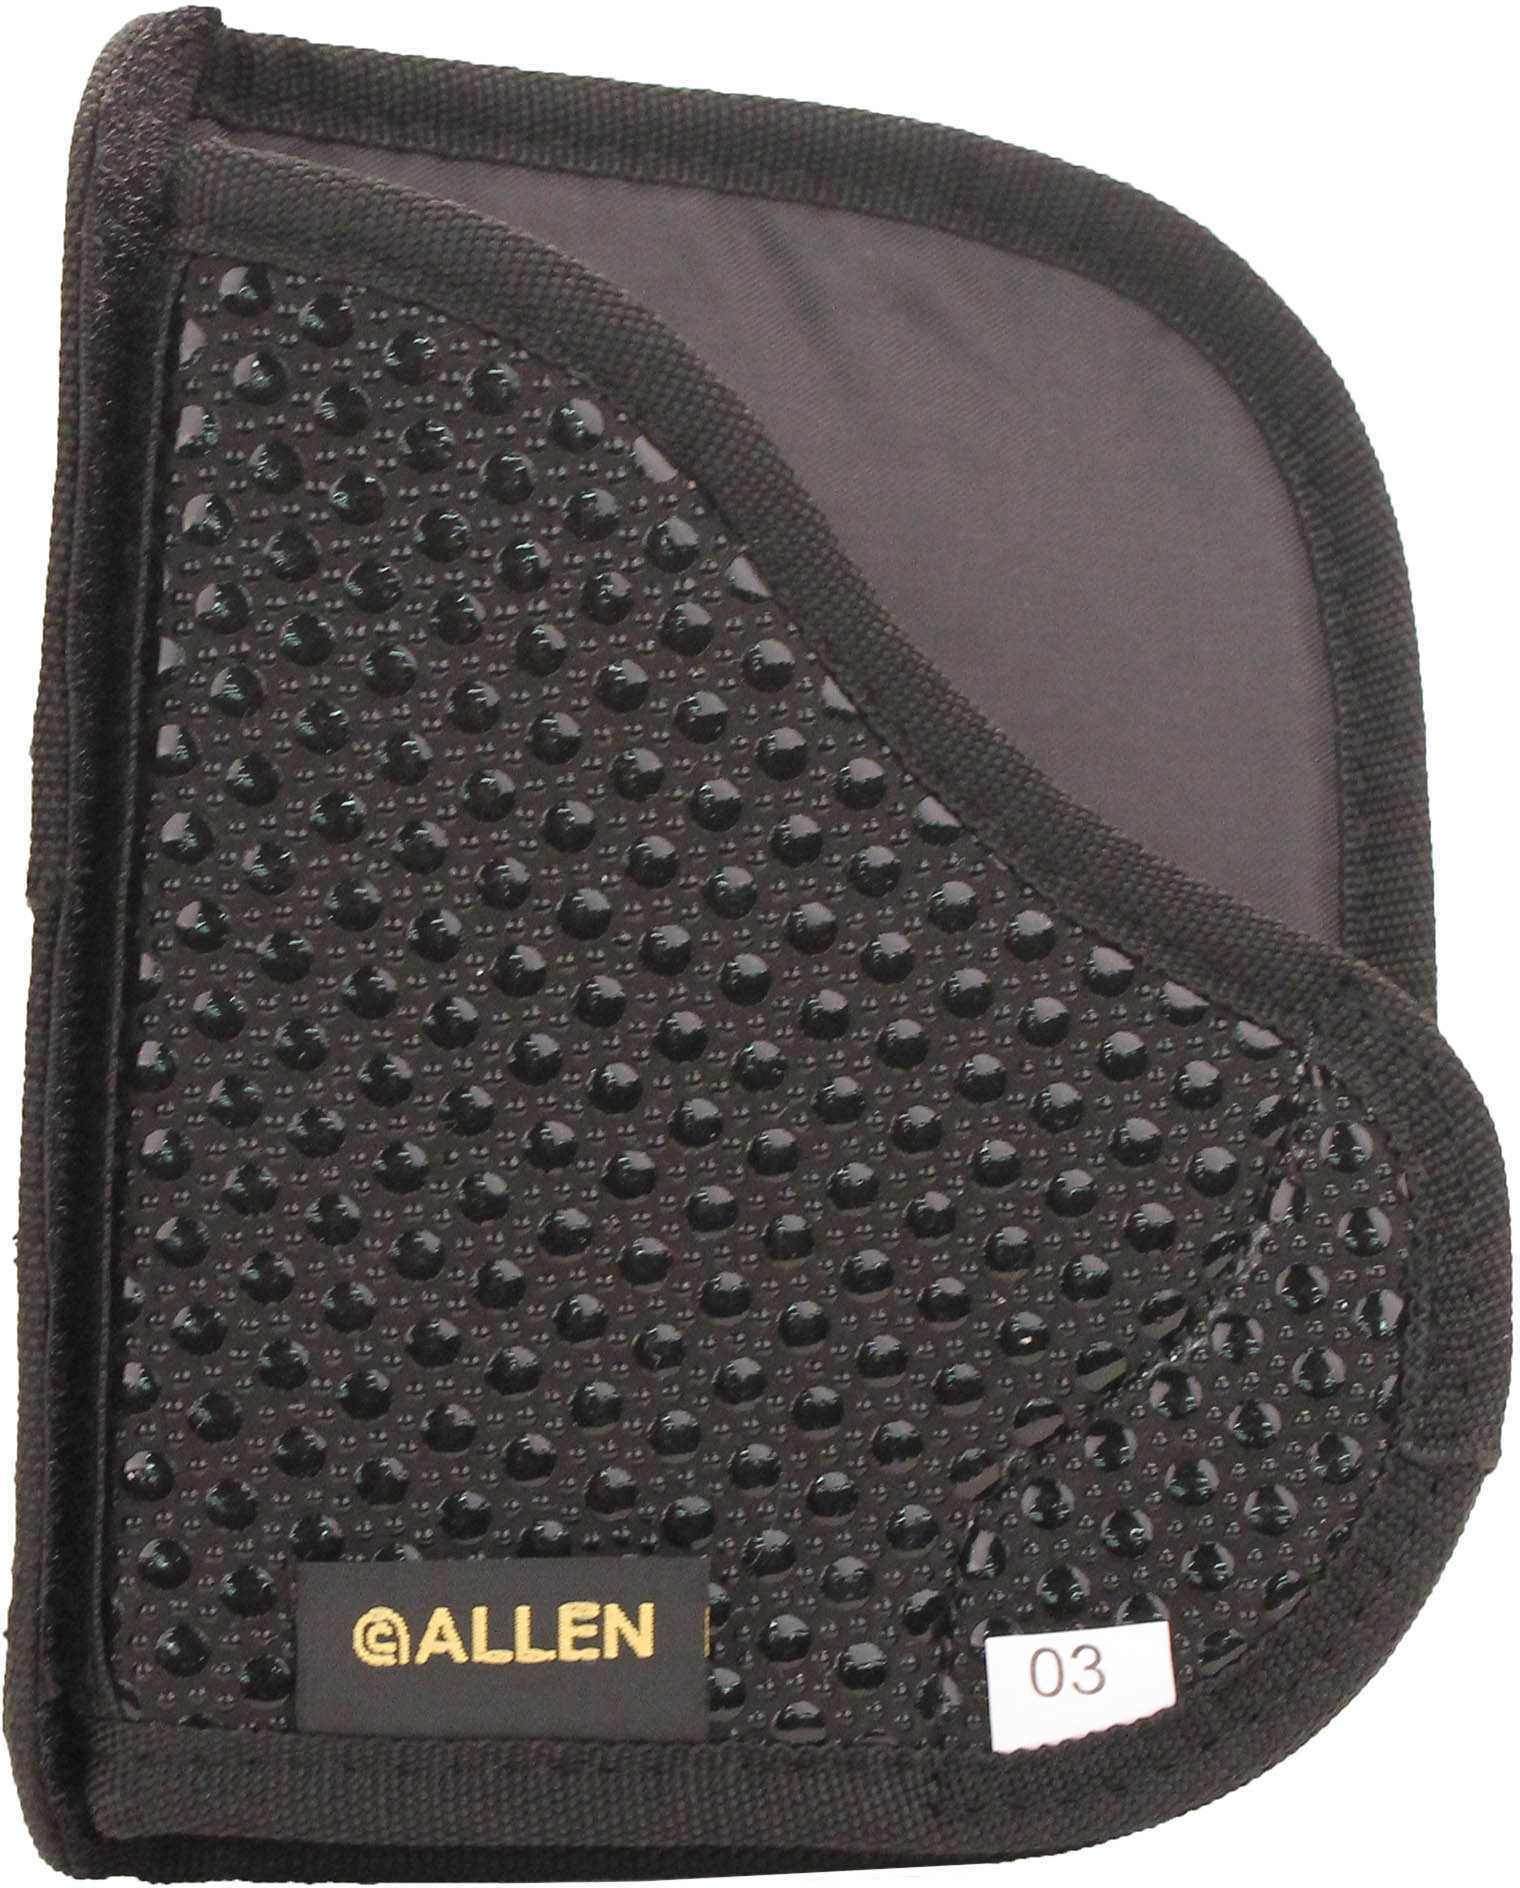 Allen Baseline In The Pocket Holster Ambidextrous Black Tacky Fabric Size Medium Fits Compact 9MM and 40 Caliber Semi-au